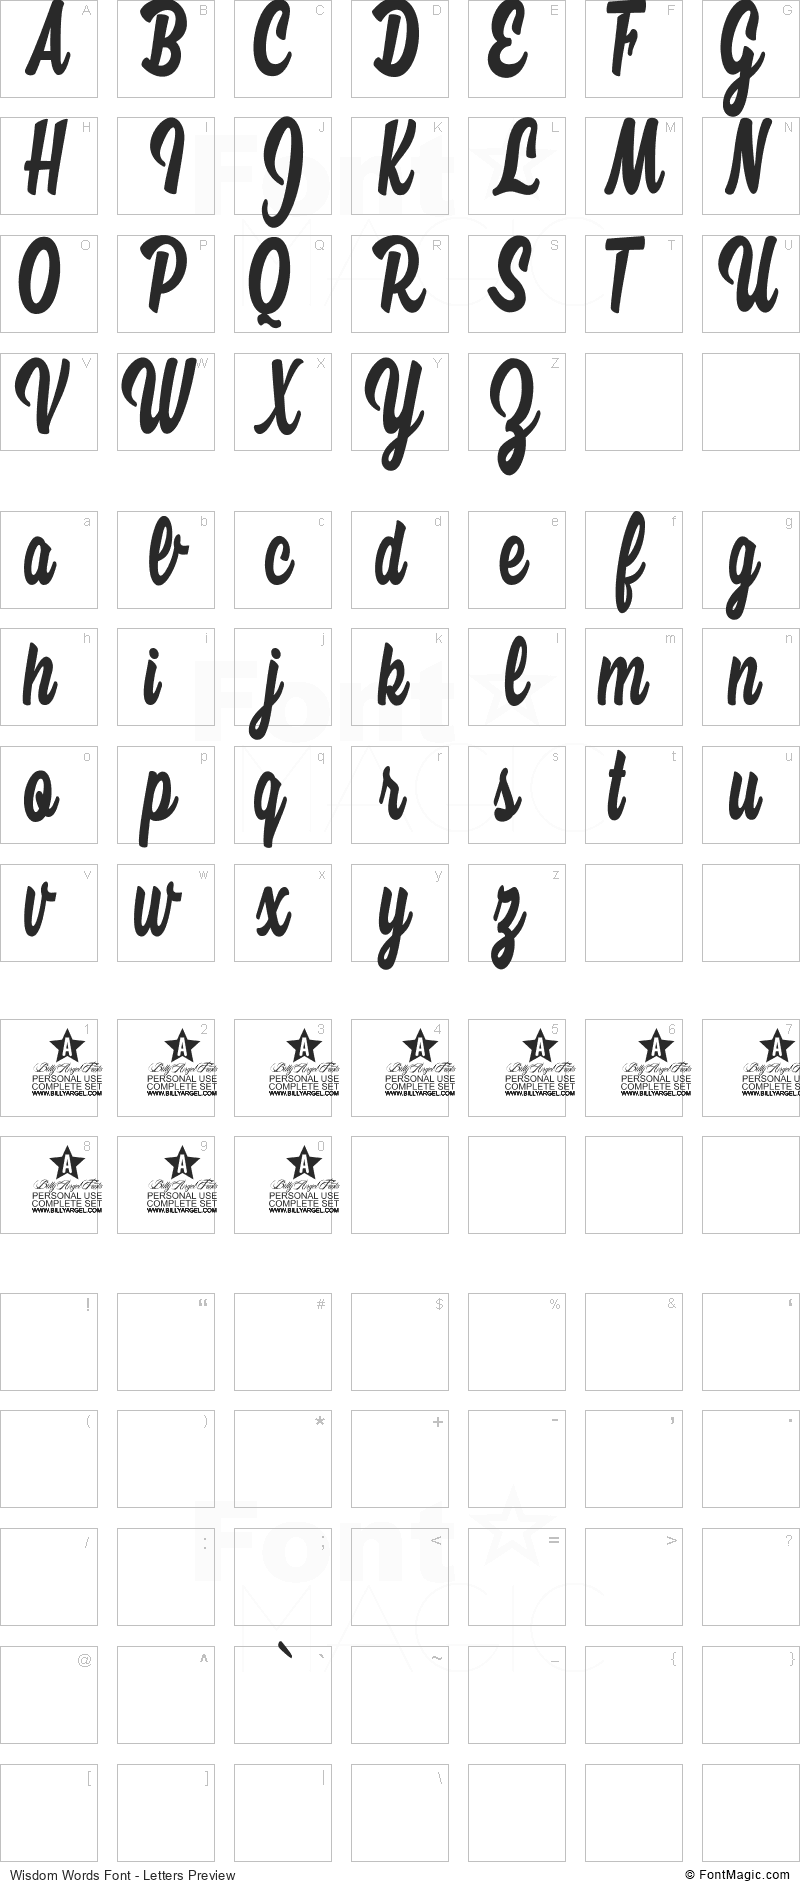 Wisdom Words Font - All Latters Preview Chart